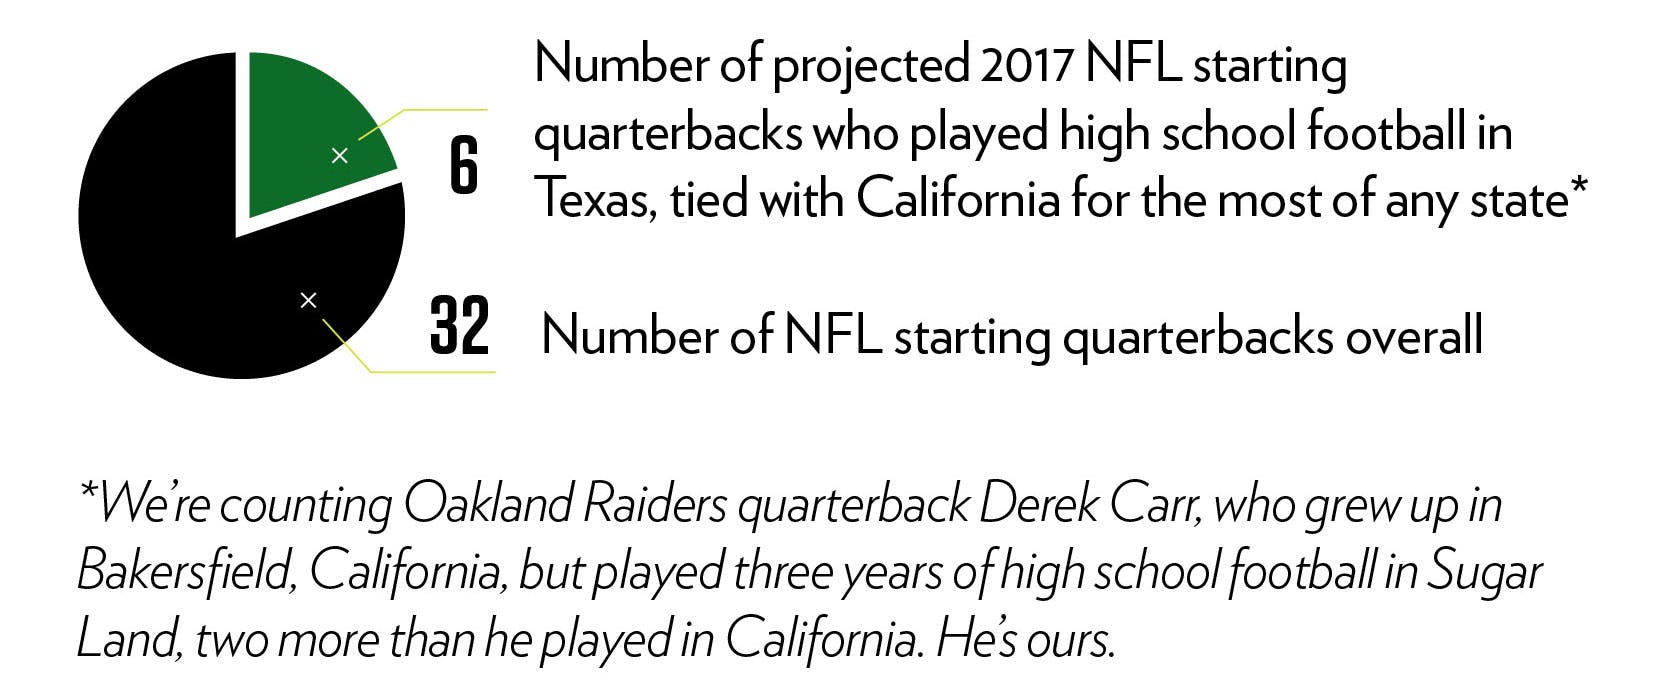 6: Number of projected 2017 NFL starting quarterbacks who played high school football in Texas, tied with California for the most of any state. 32: Number of NFL starting quarterbacks overall.